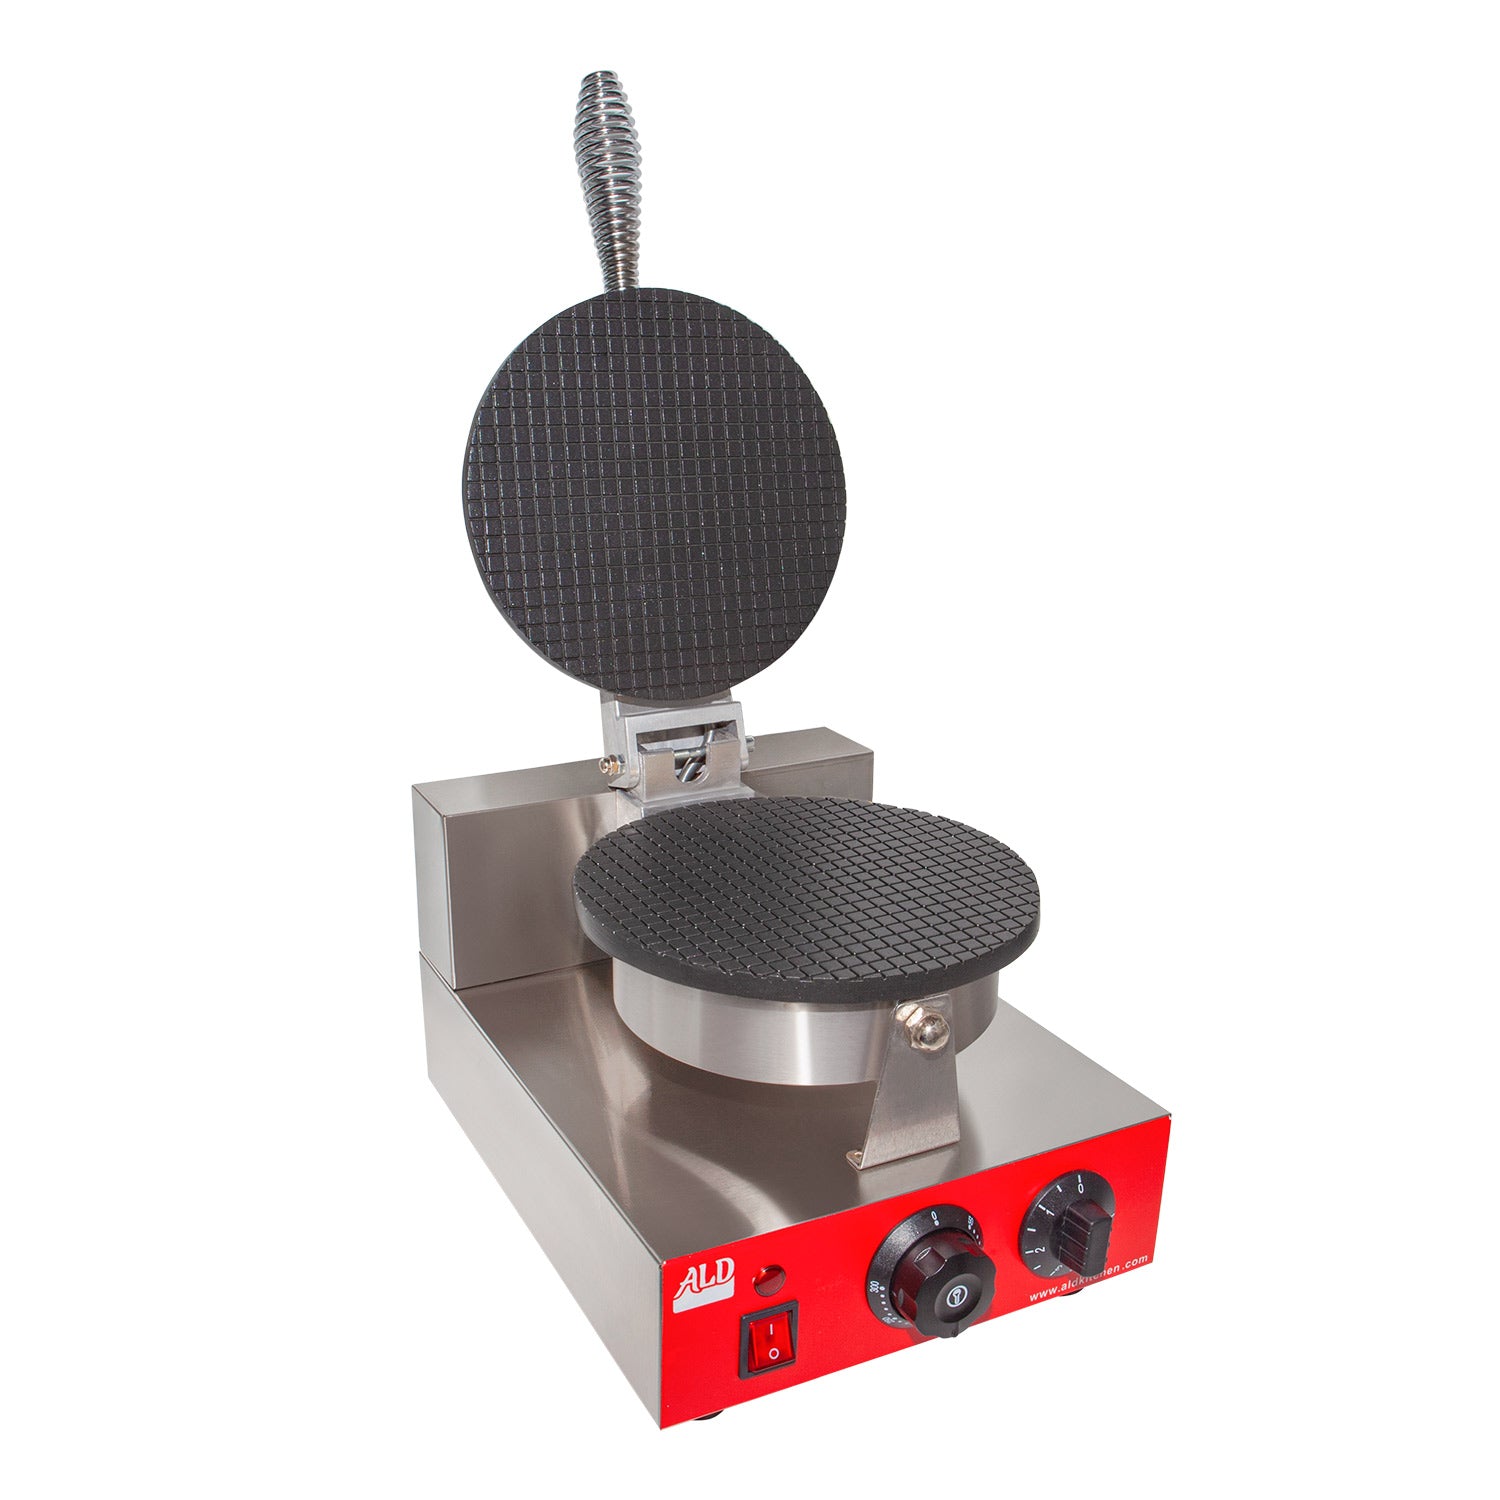 AR-HCB1 Waffle Cone Maker | Commercial Waffle Roll Maker | Nonstick Coating| Stainless Steel | 1.2kW